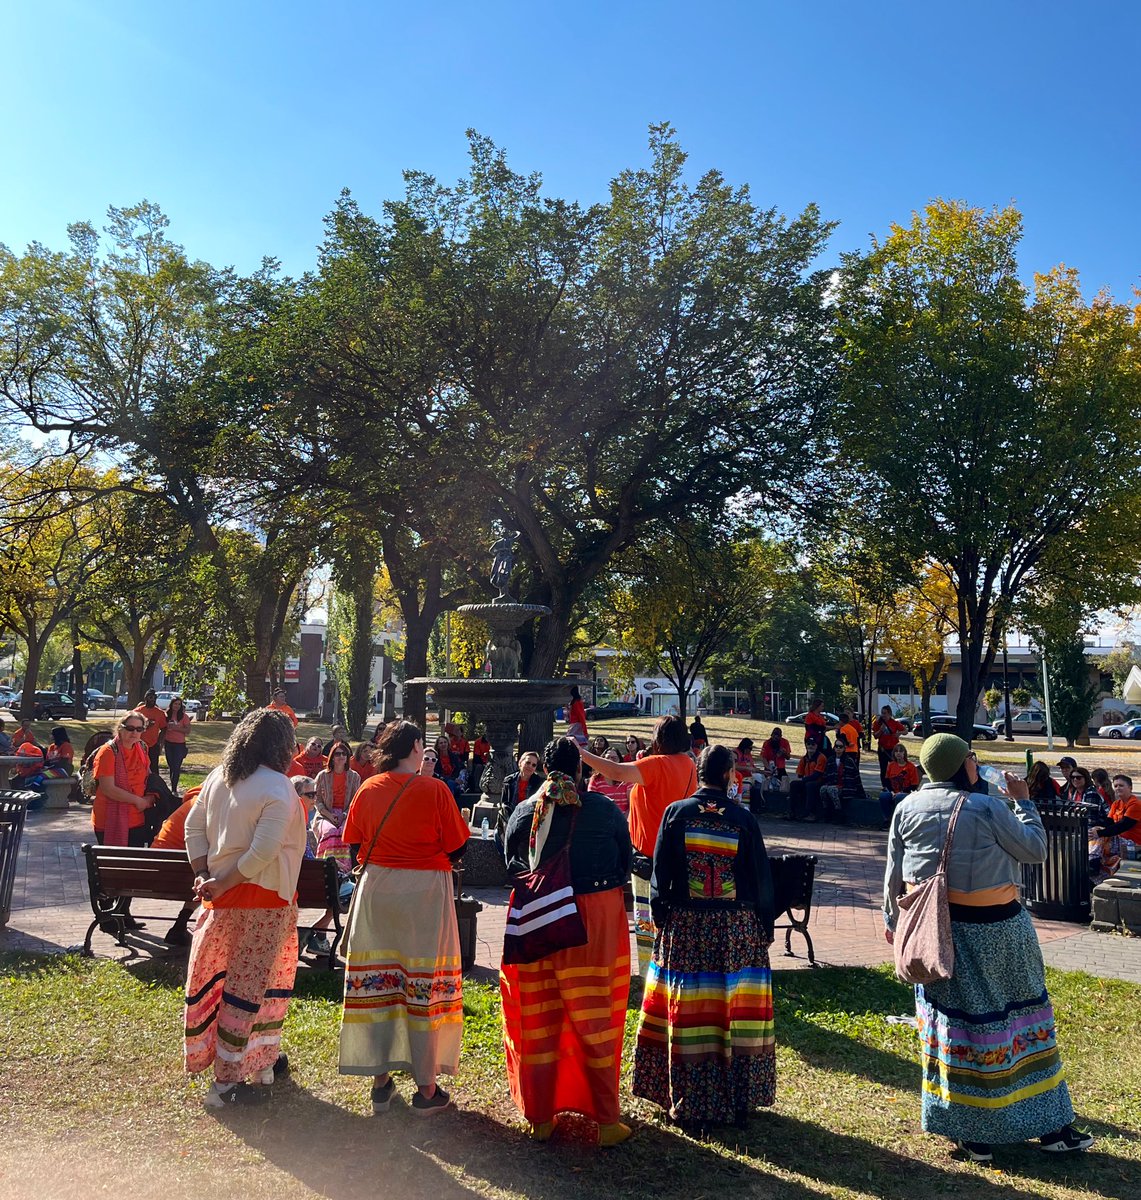 🧡 Thx to the Standing Together #OrangeShirtDay Walk organizers for creating such an inclusive & beautiful  space for all community members to gather & reflect on #NDTR2022. #EveryChildMatters